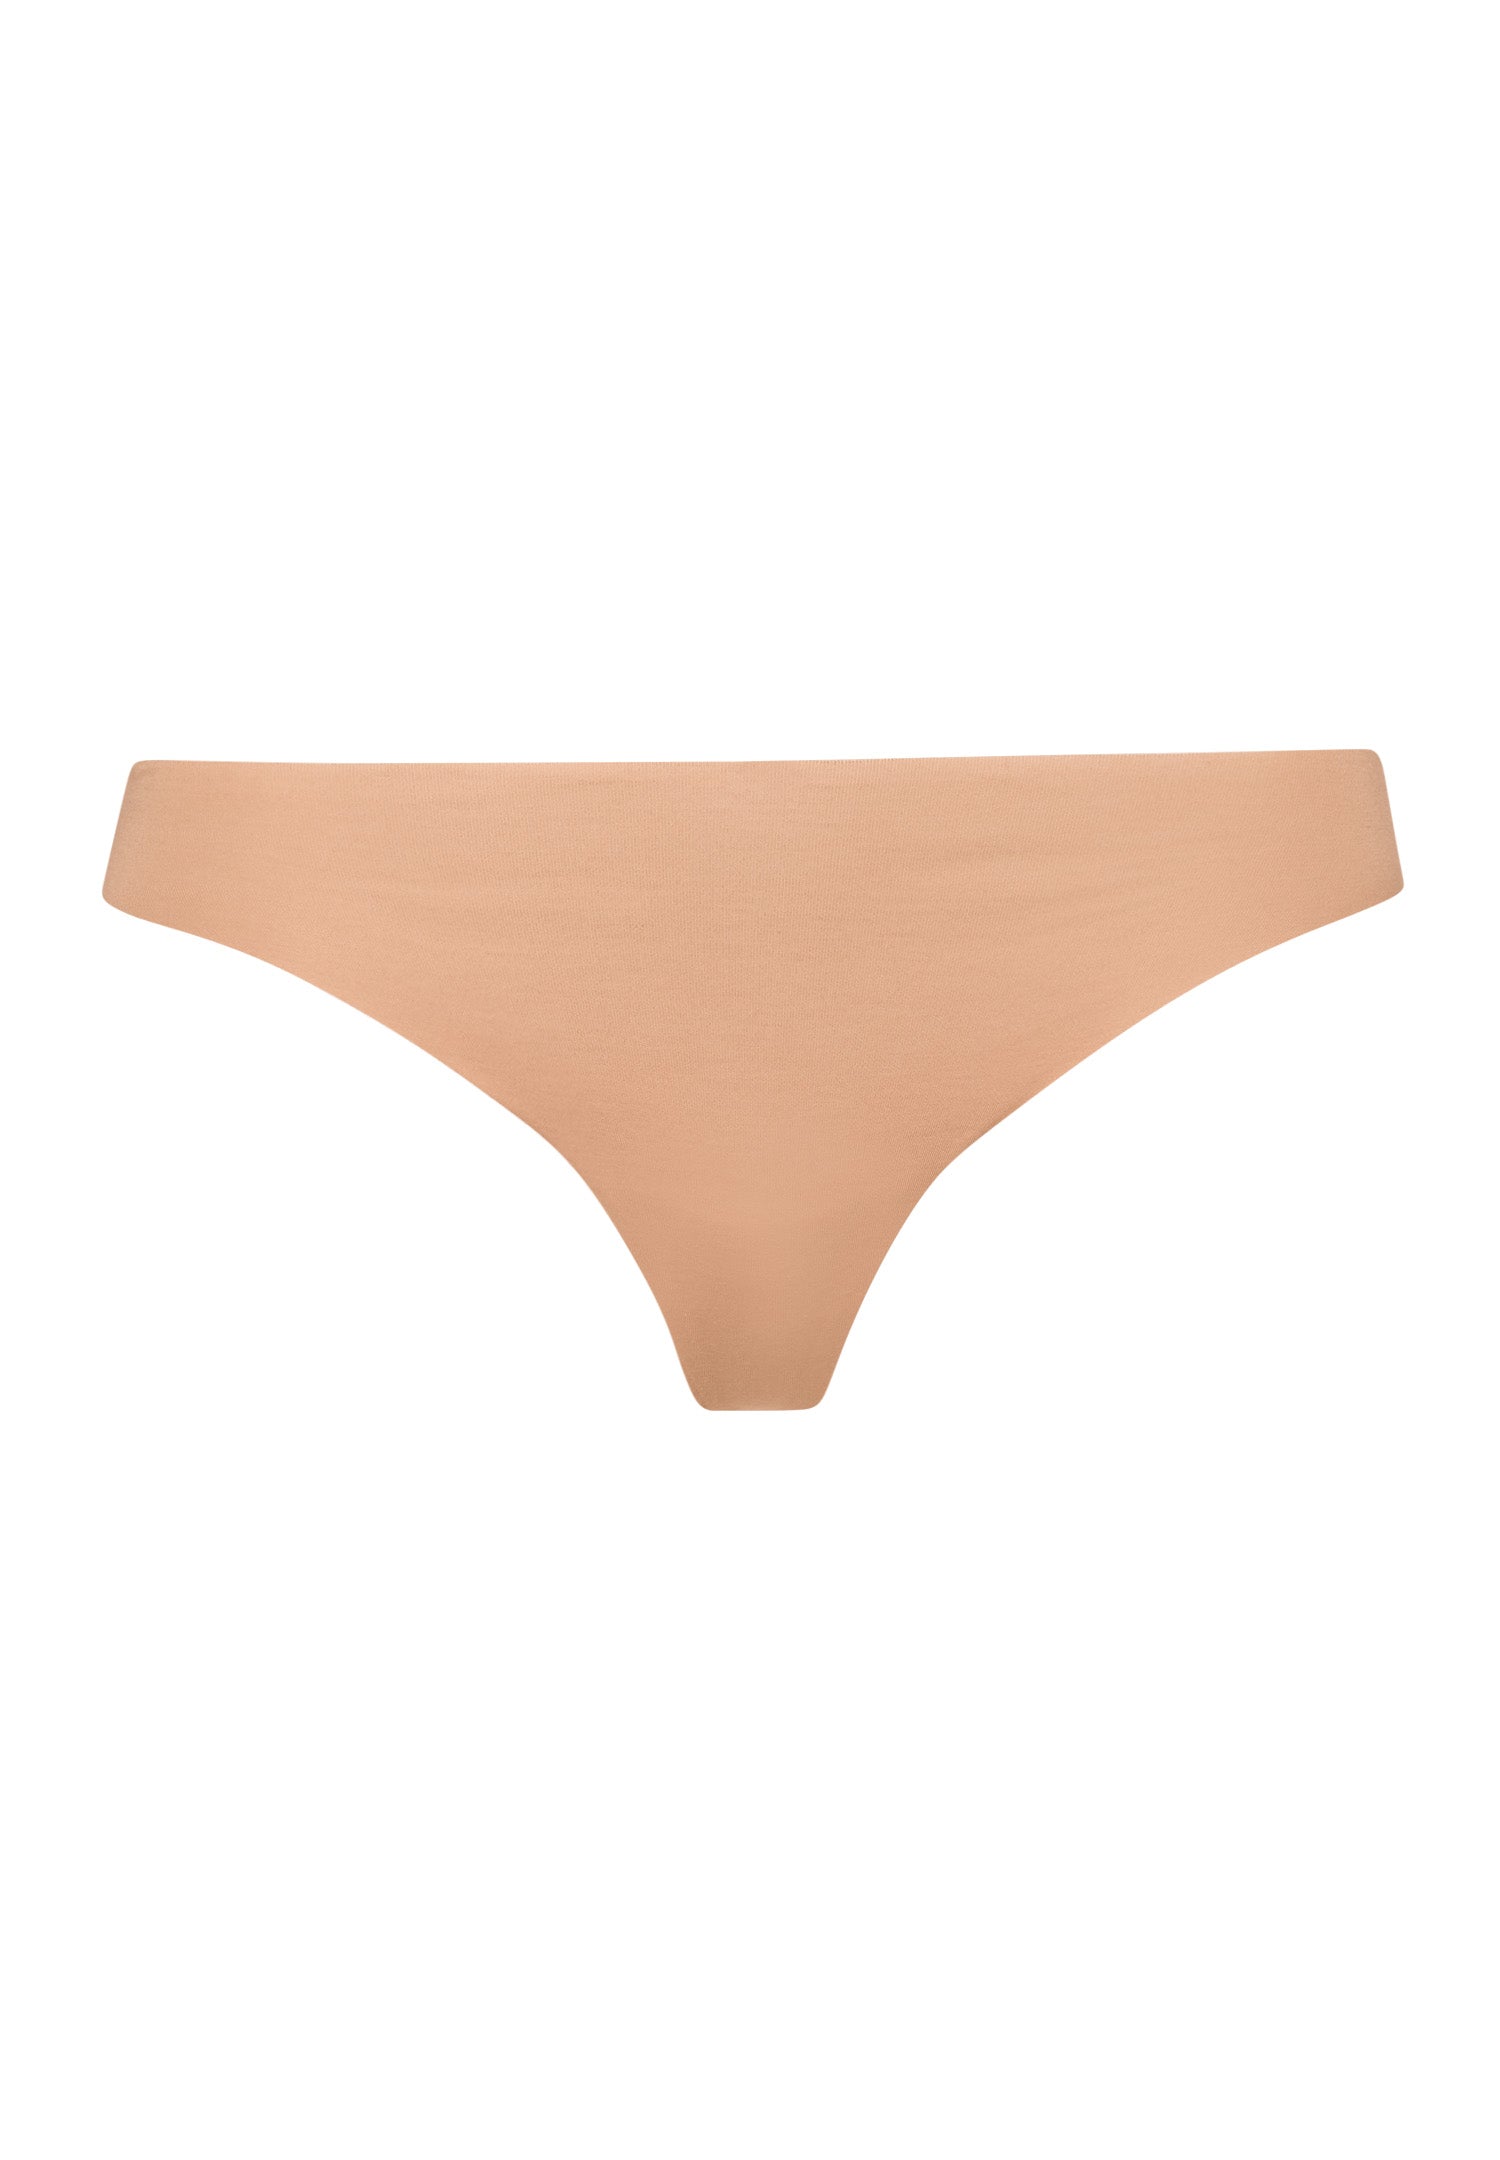 71225 Invisible Cotton Thong - 1272 Beige